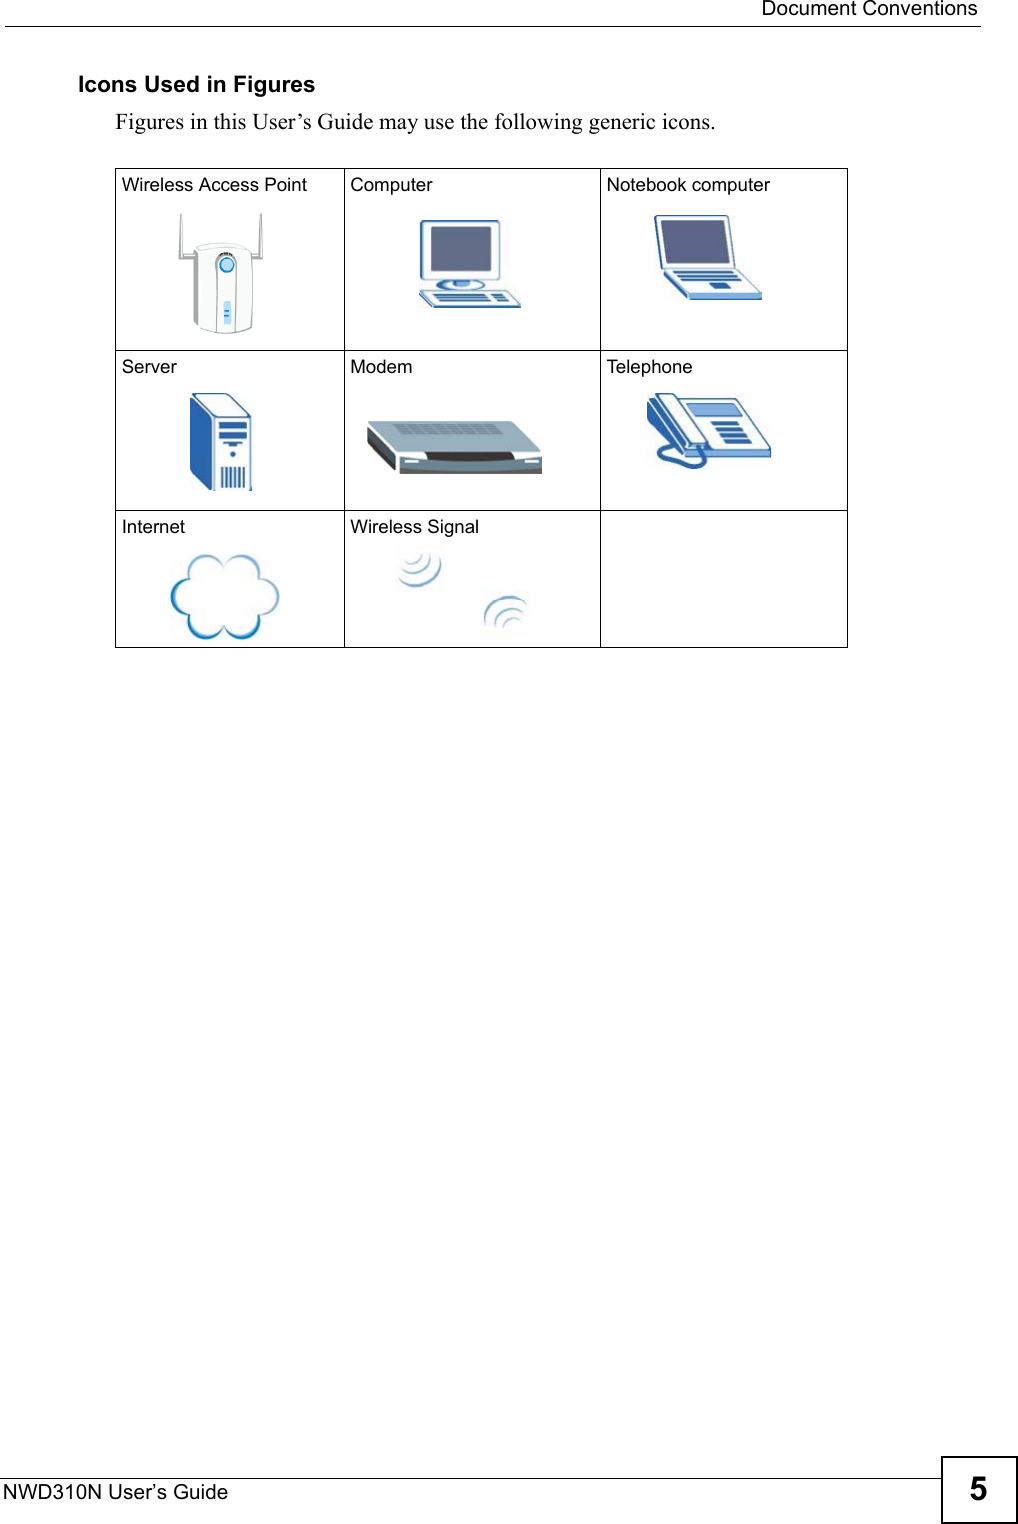  Document ConventionsNWD310N User’s Guide 5Icons Used in FiguresFigures in this User’s Guide may use the following generic icons. Wireless Access Point Computer Notebook computerServer Modem TelephoneInternet Wireless Signal